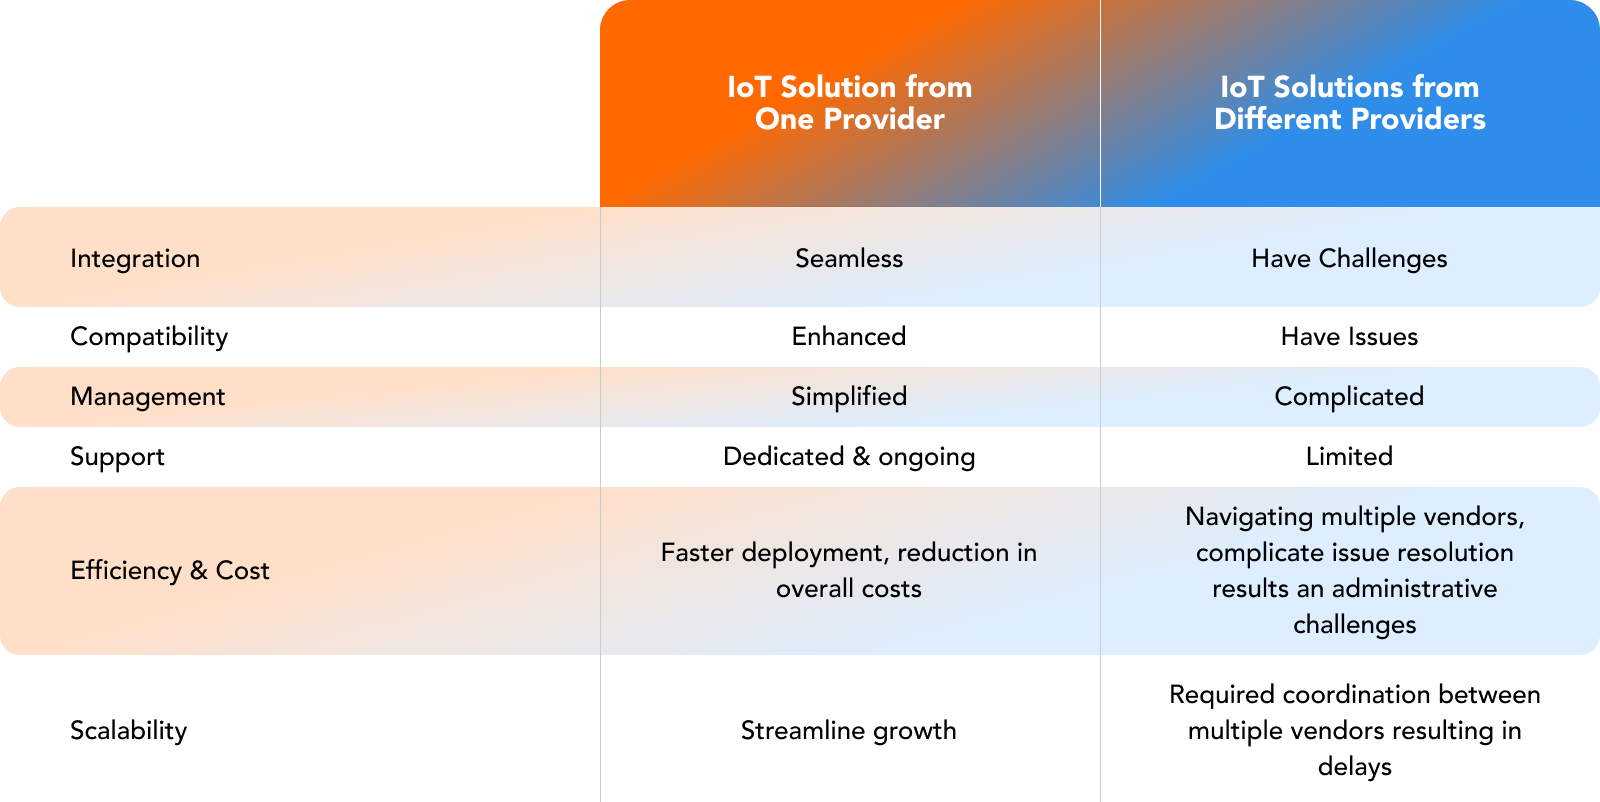 Solution from One Provider vs Different Providers